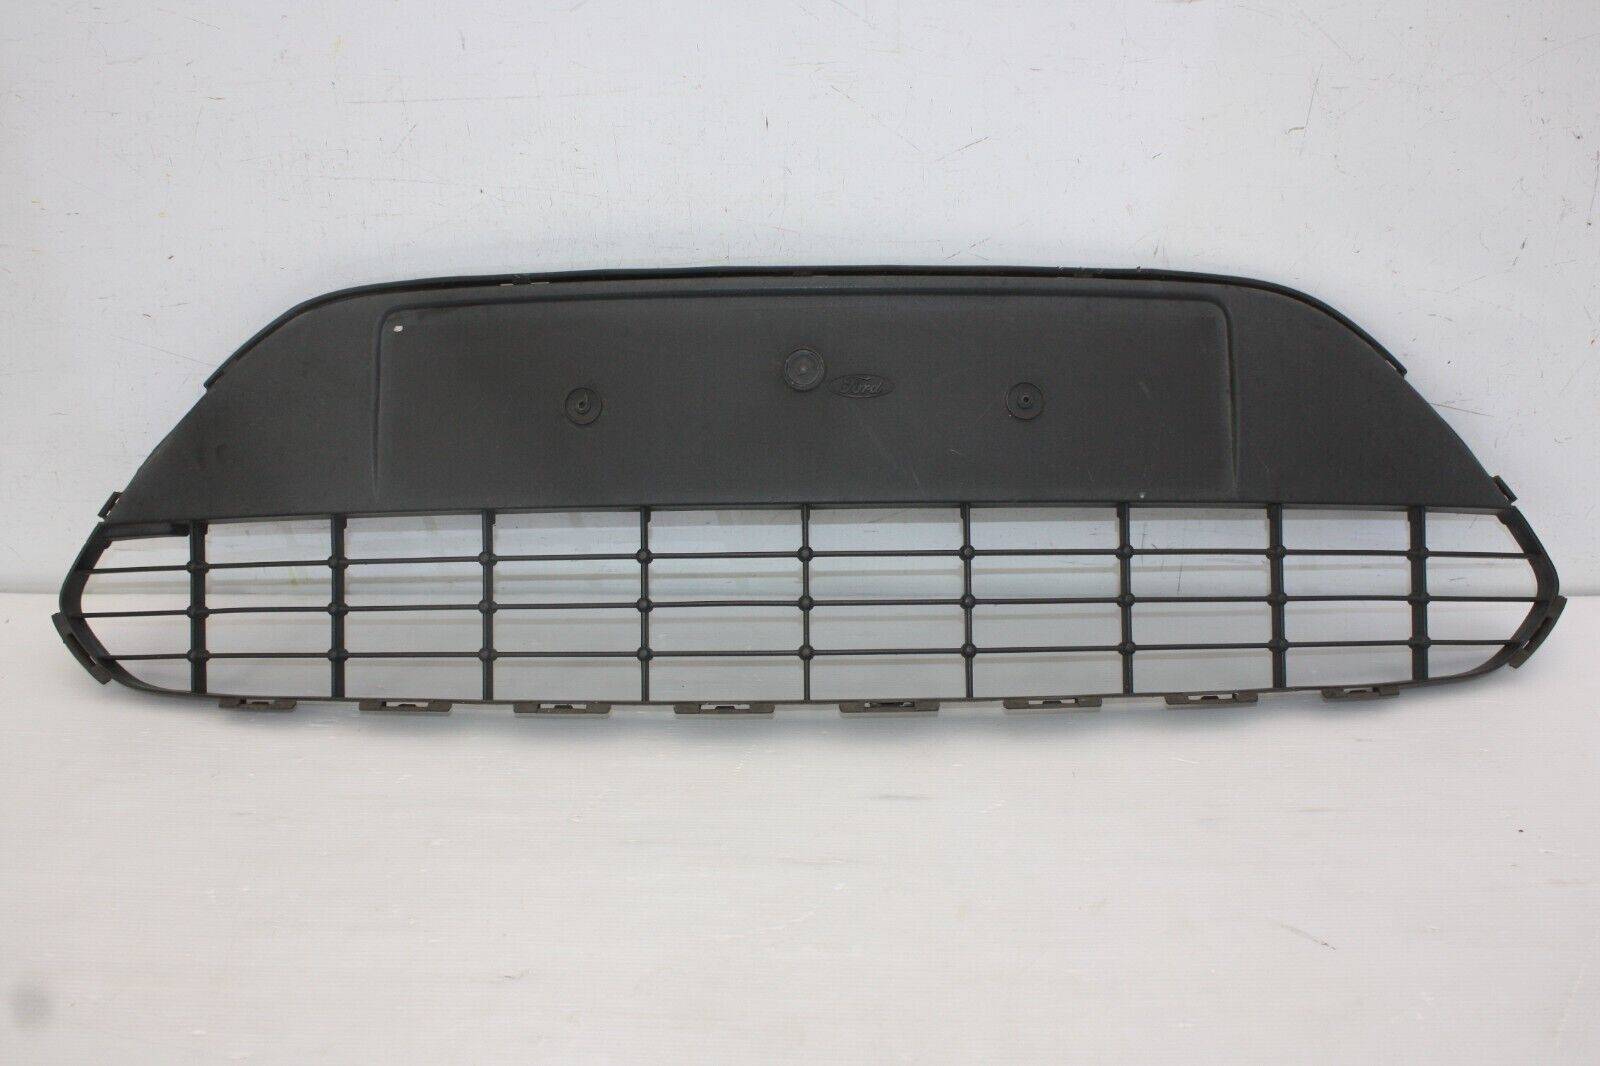 Ford-Focus-Front-Bumper-Grill-2008-TO-2011-8M51-17B968-BE-Genuine-SEE-PICS-175622452576